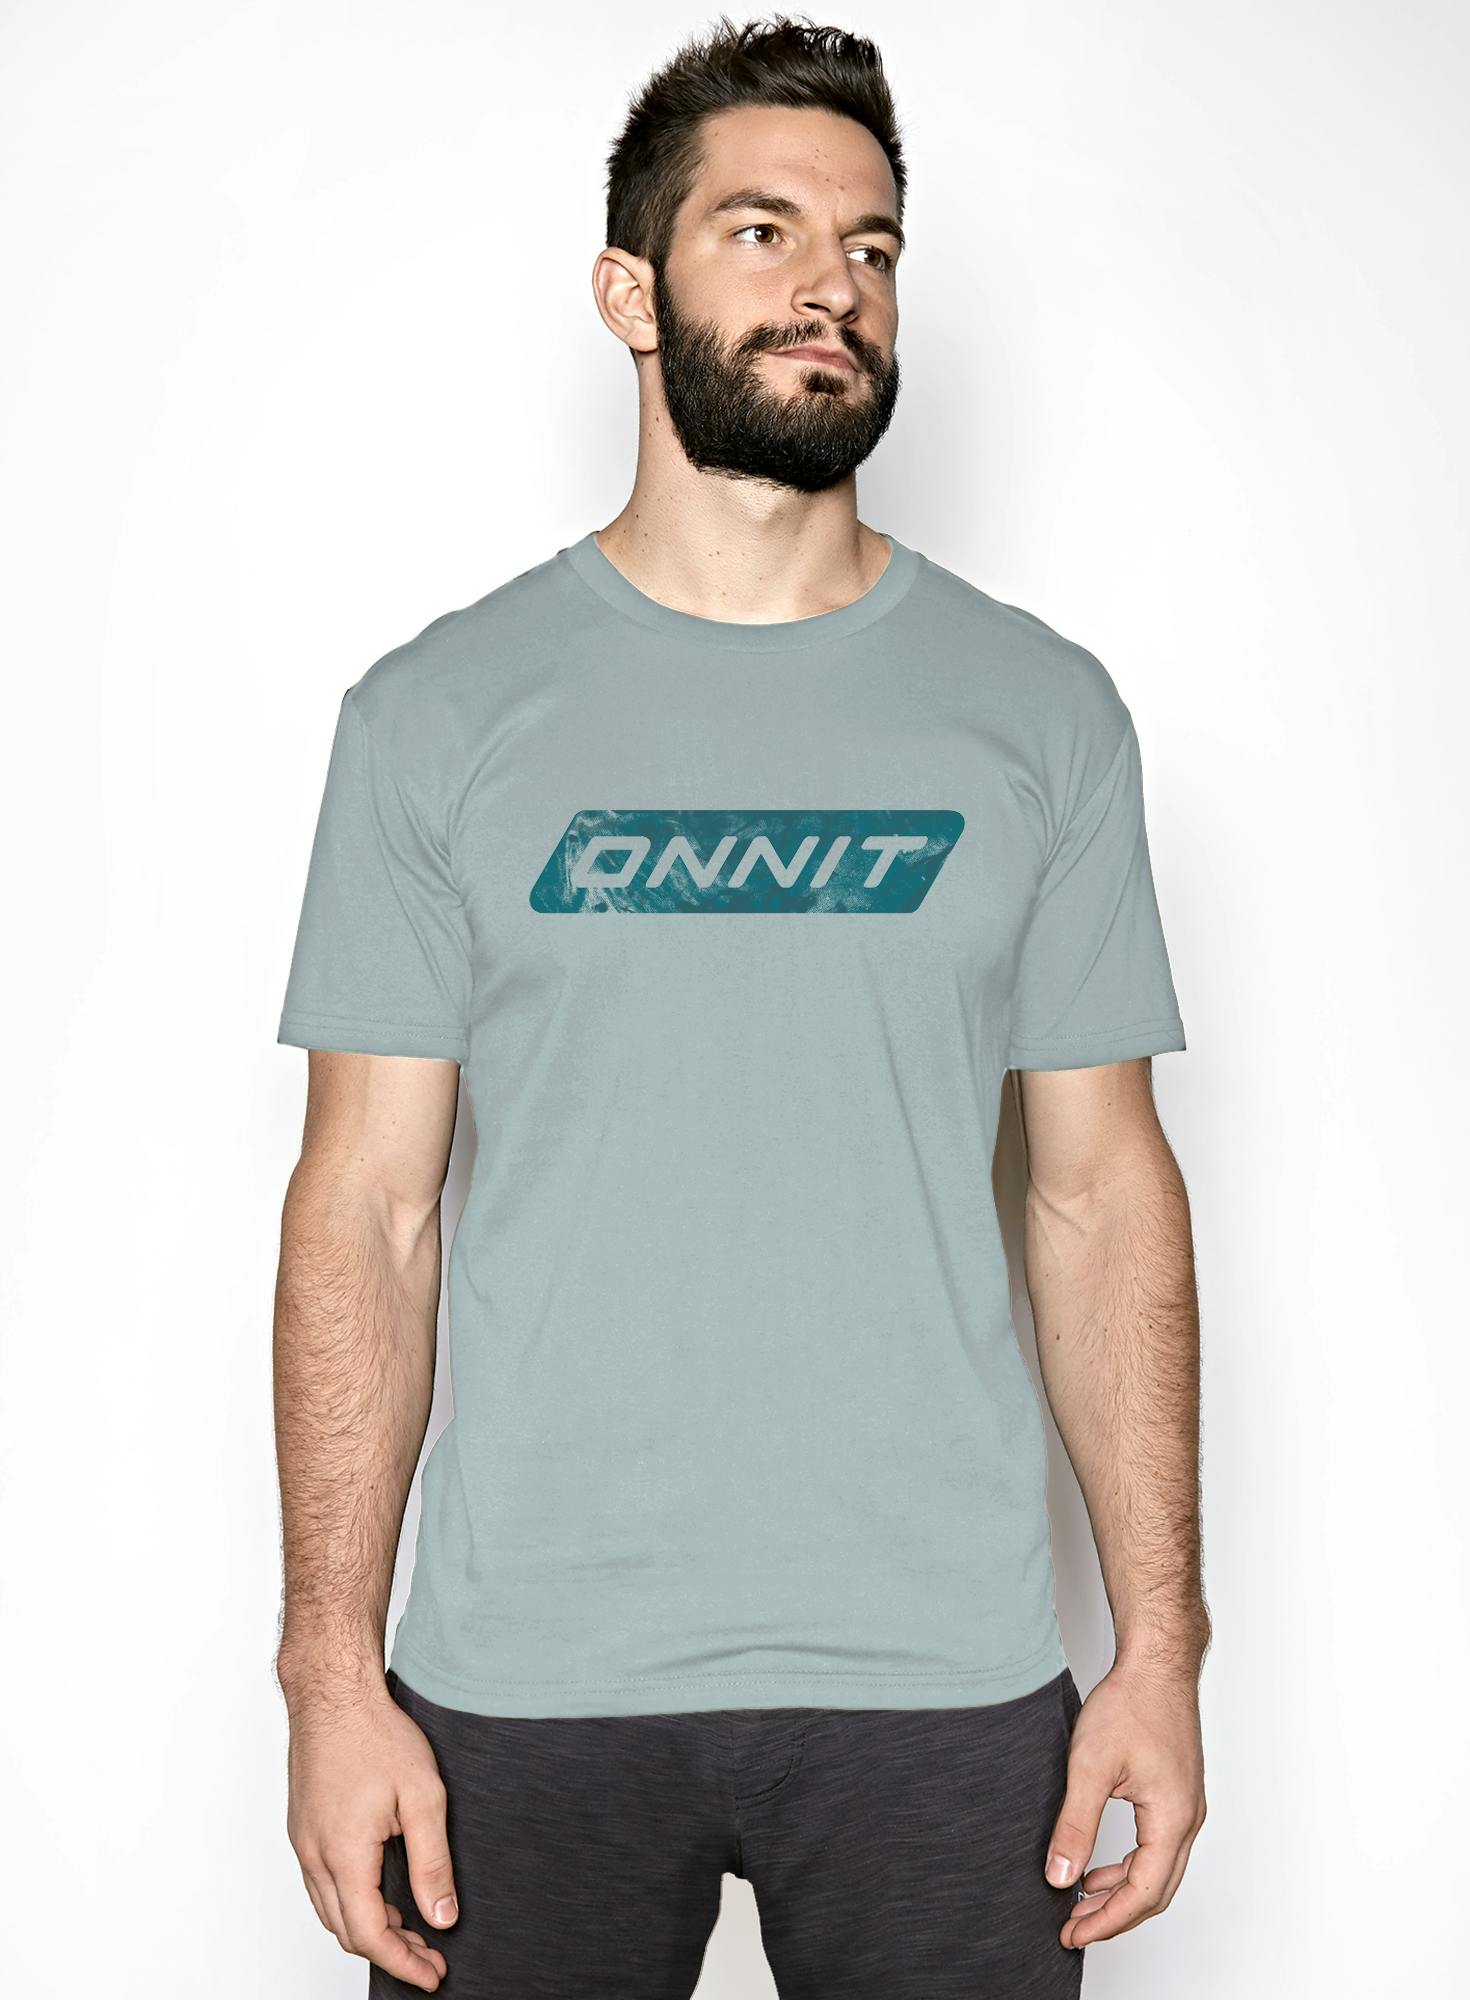 Onnit Capsule Texture T-Shirt